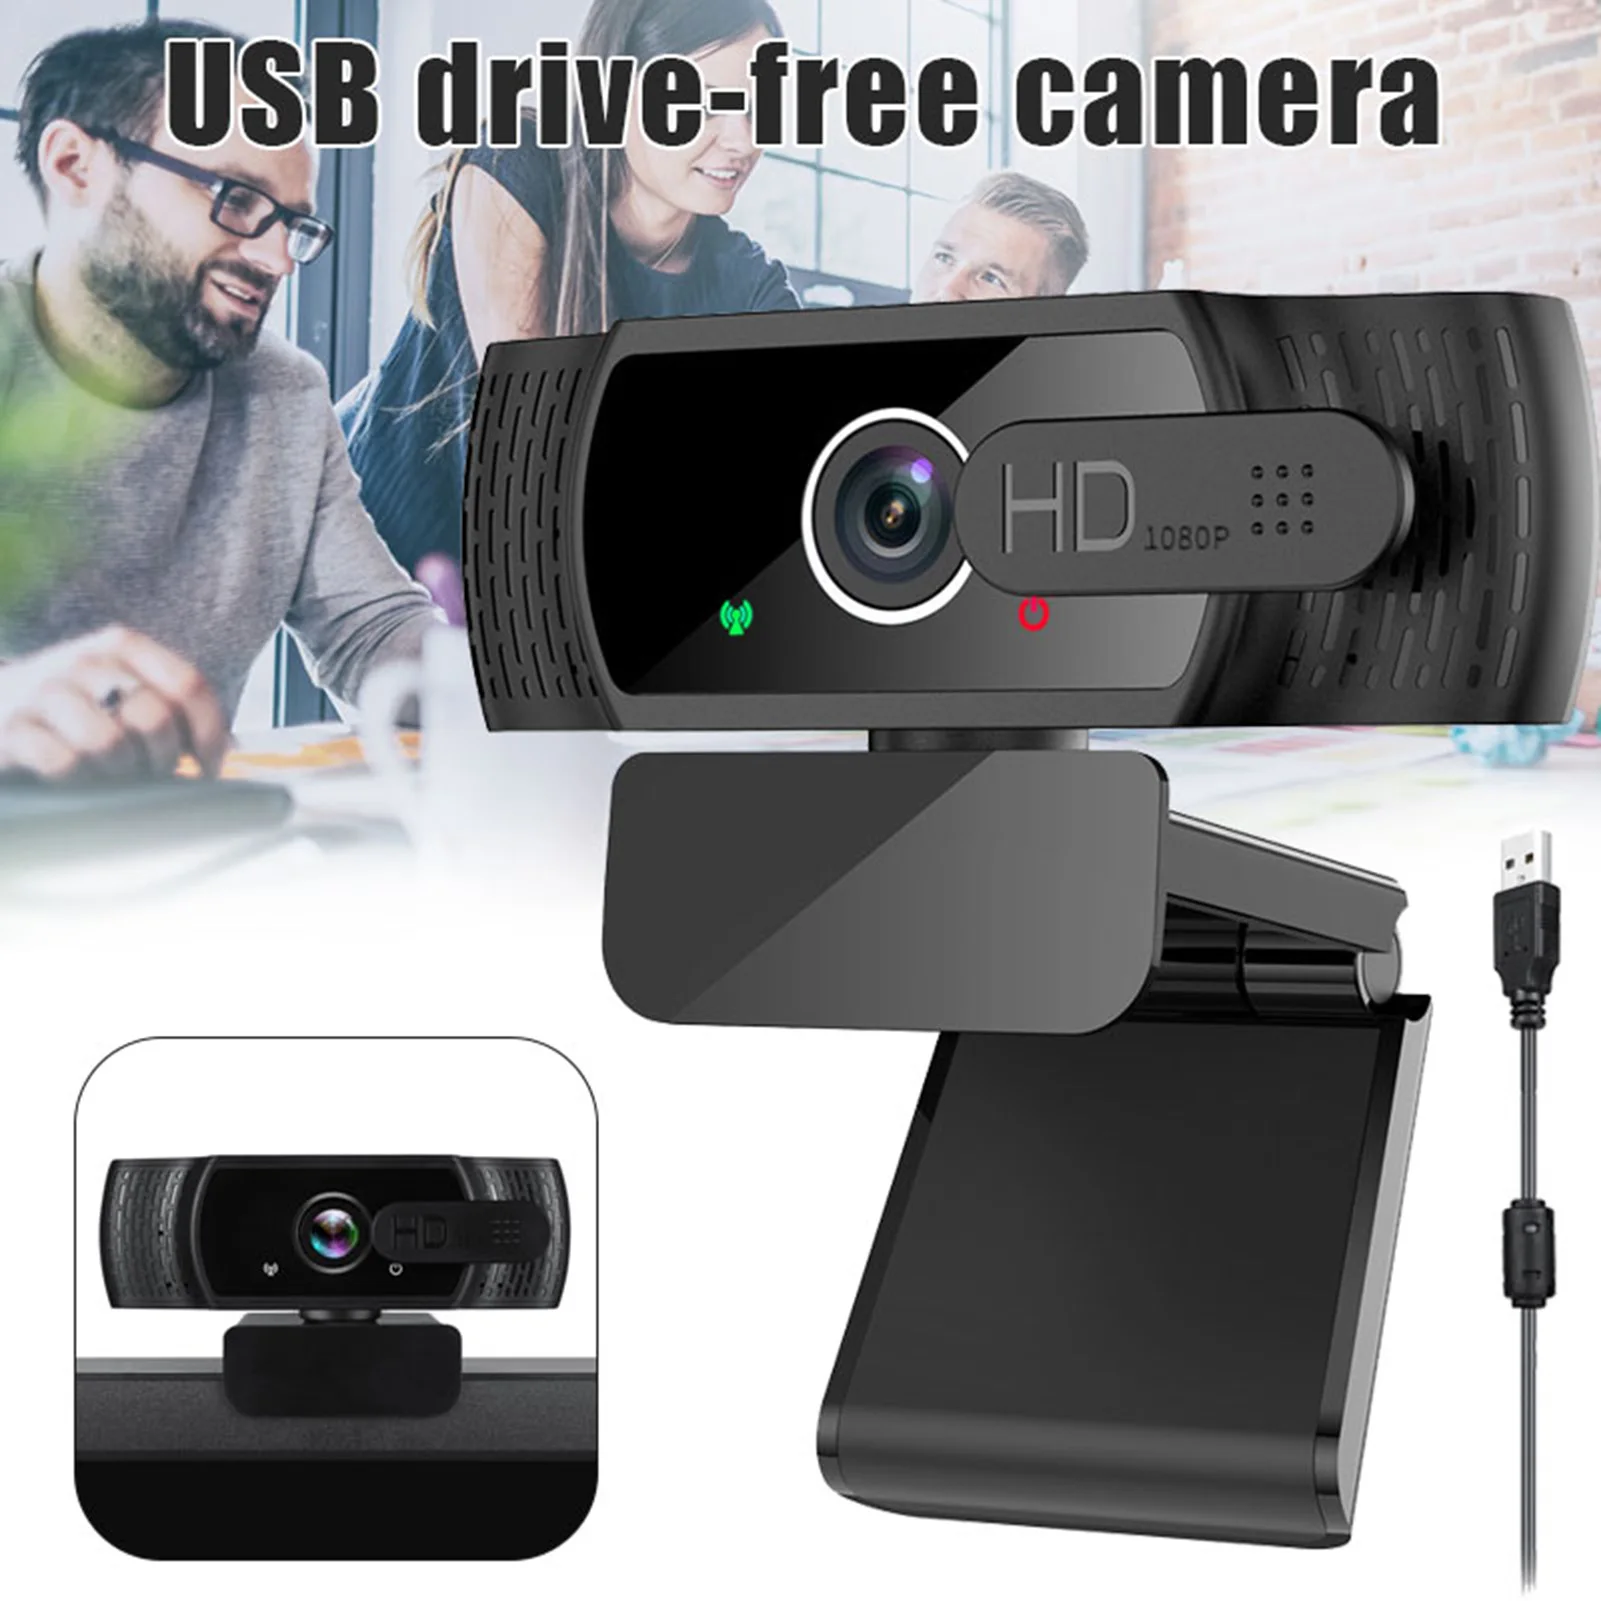 

Desktop Video Live Streaming Webcam Noise Reduction USB Drive Free Camera Suitable for Video Calling Recording SEC88